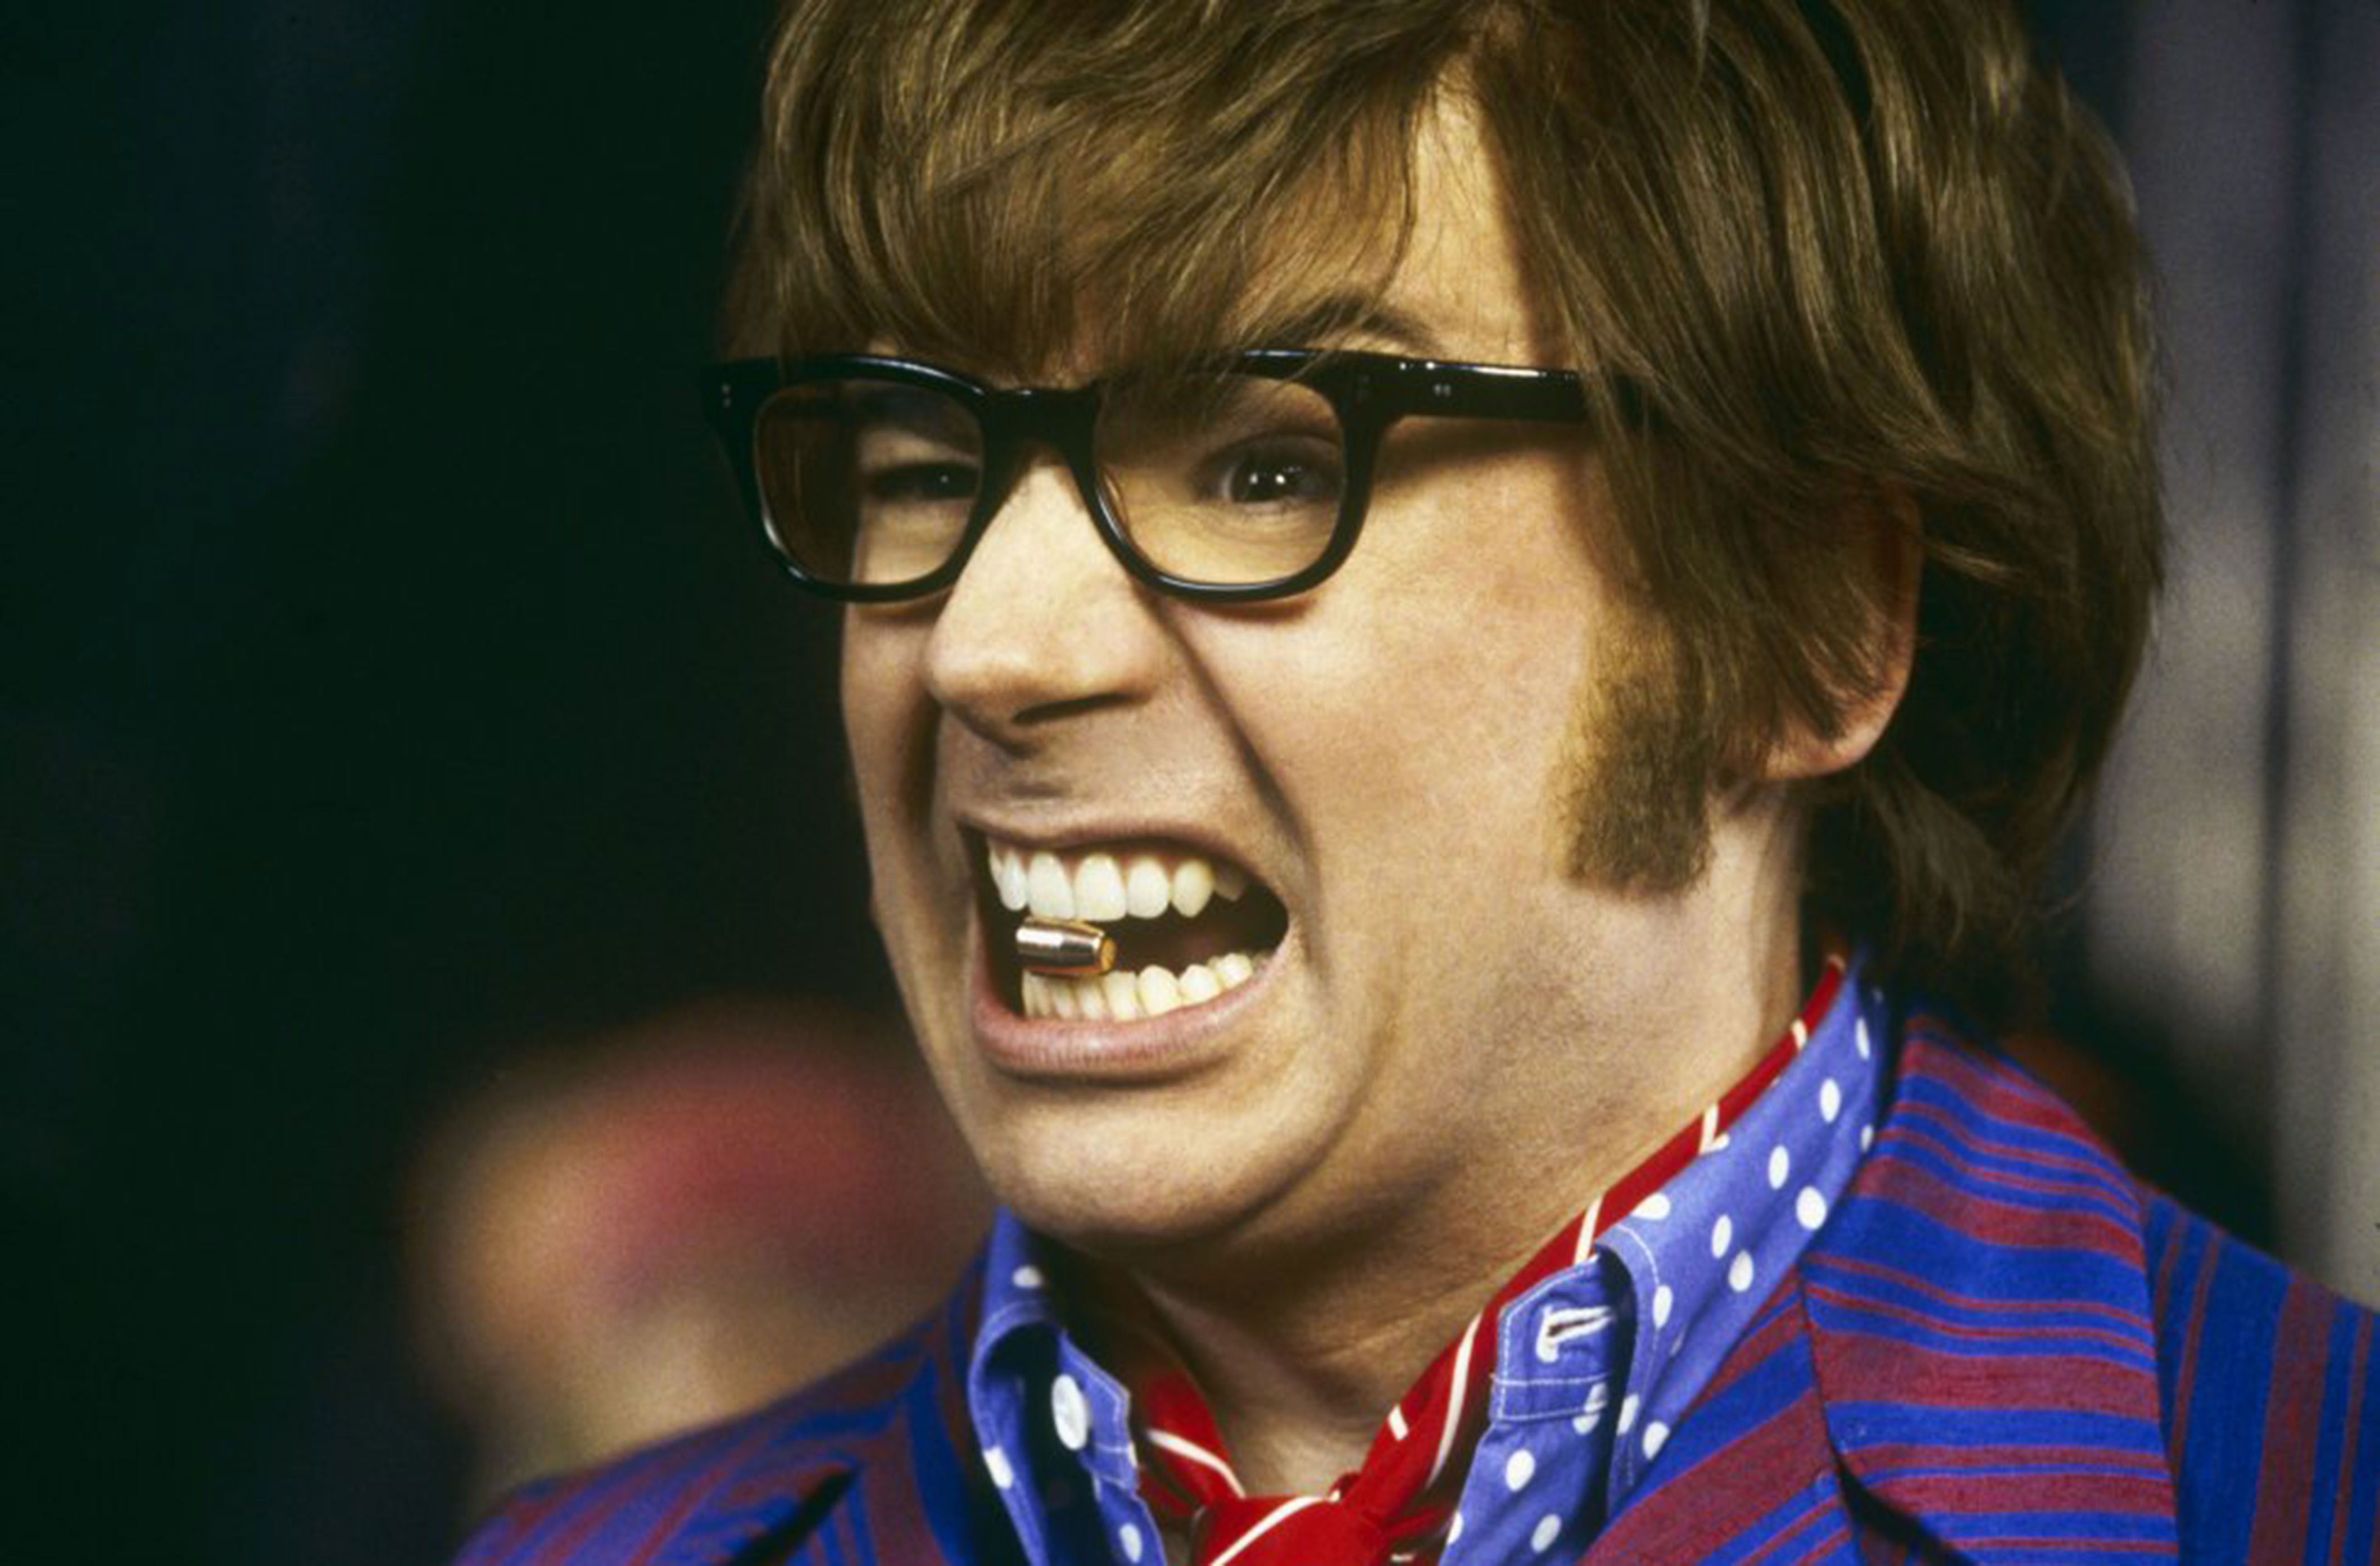 <p>"Austin Powers" -- released in 1997 and starring Mike Myers, pictured -- comes in at No. 6 on our list thanks to its originality, hysterical script and pop culture significance. Will Ferrell had a small role in "Austin Powers: International Man of Mystery" as Mustafa, a fez-wearing assassin, but acted it to perfection, considering it was one of his first major movie roles.</p>